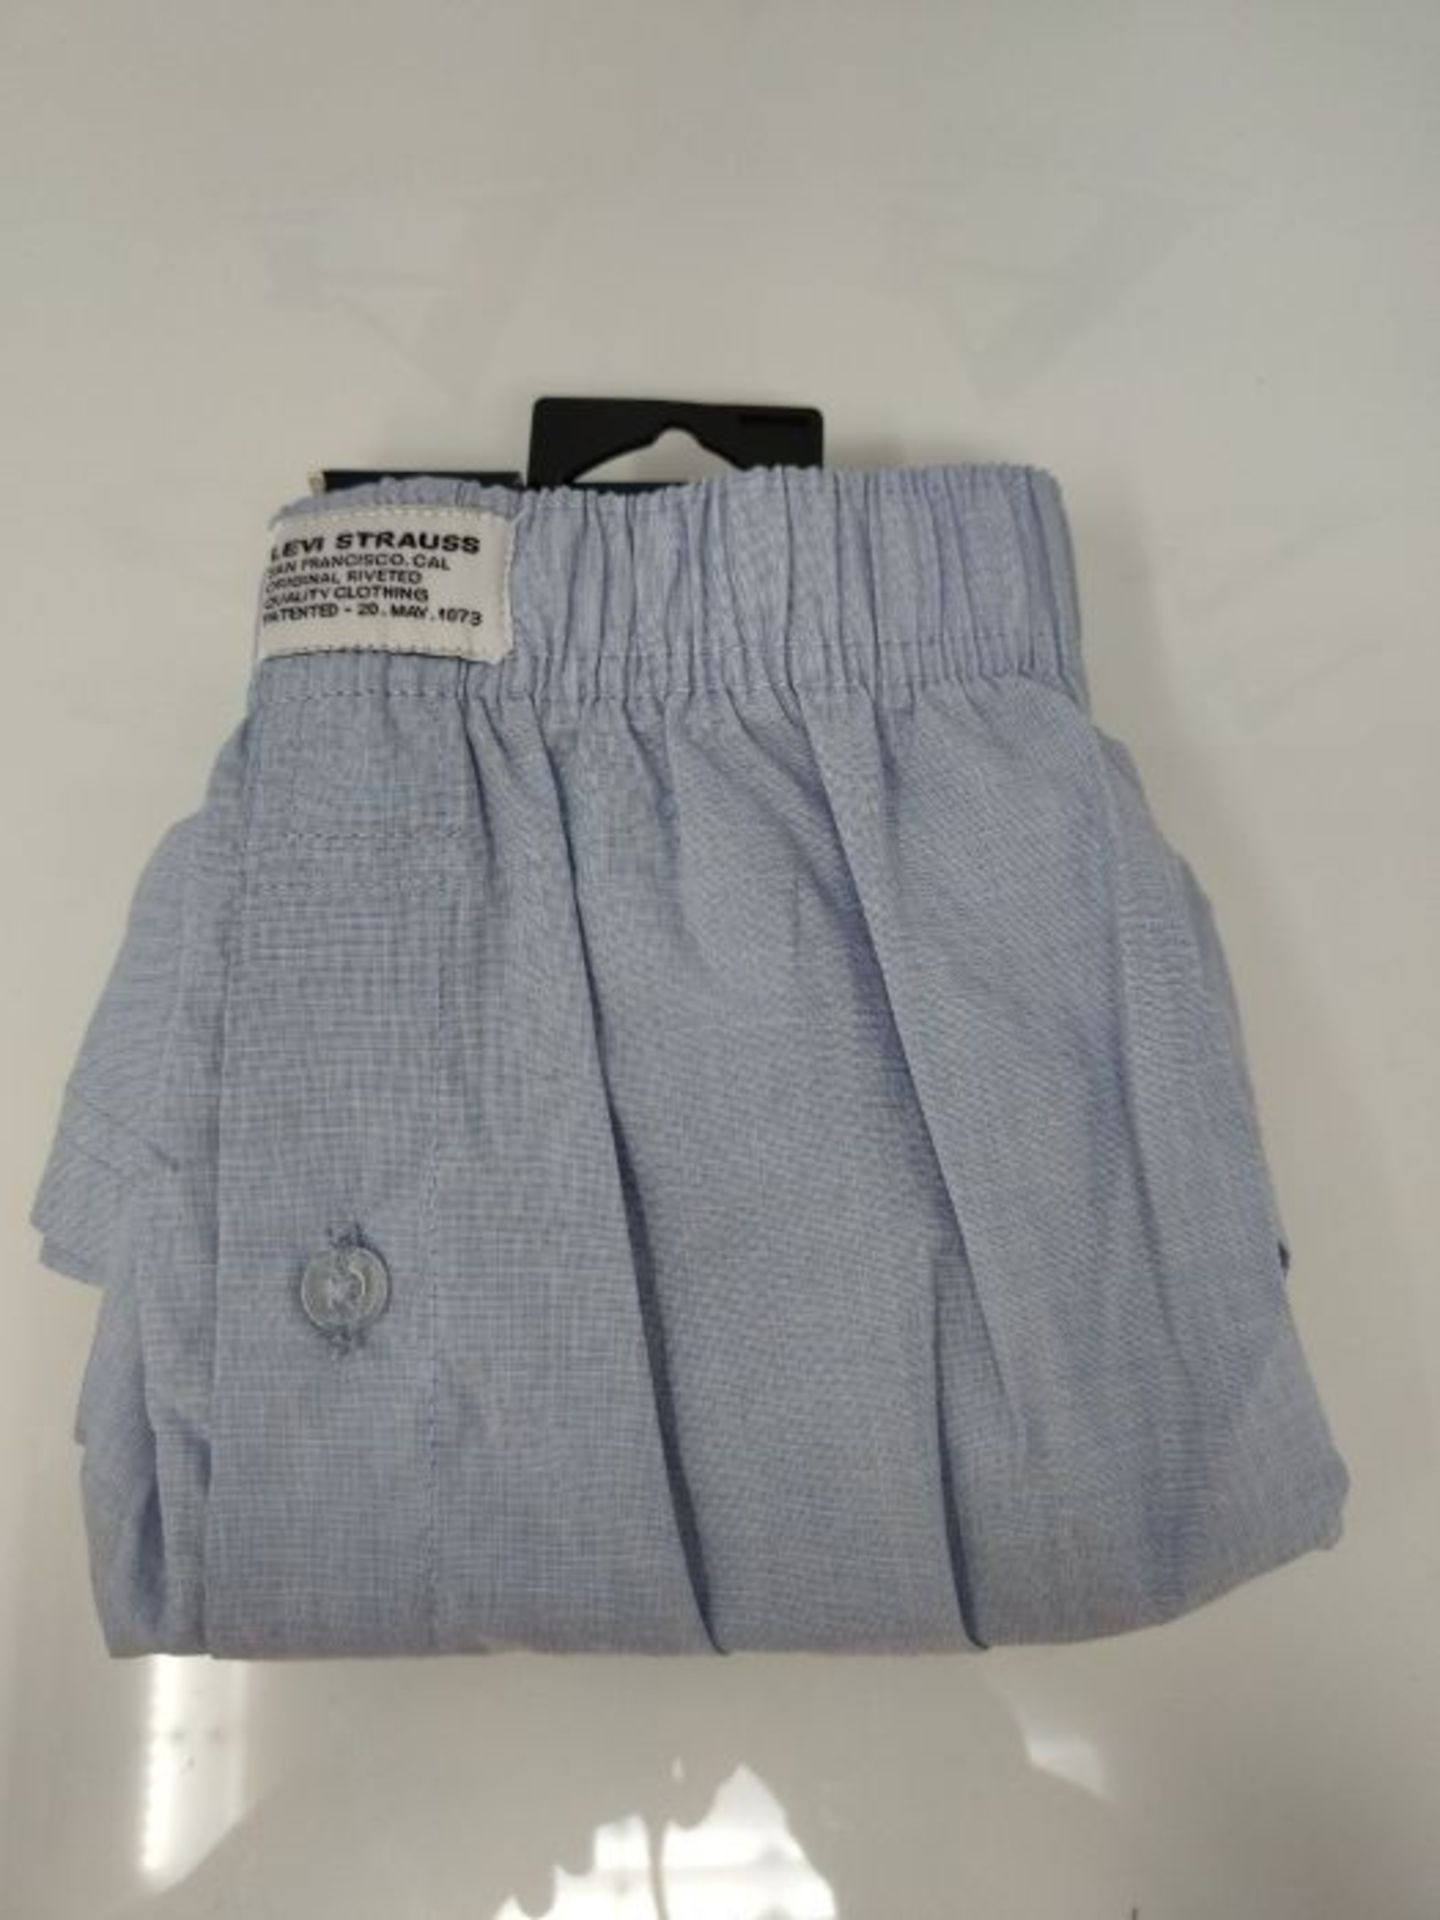 LEVIS Men's Woven Boxer Shorts, Light Blue, Small (Pack of 2) - Image 3 of 3